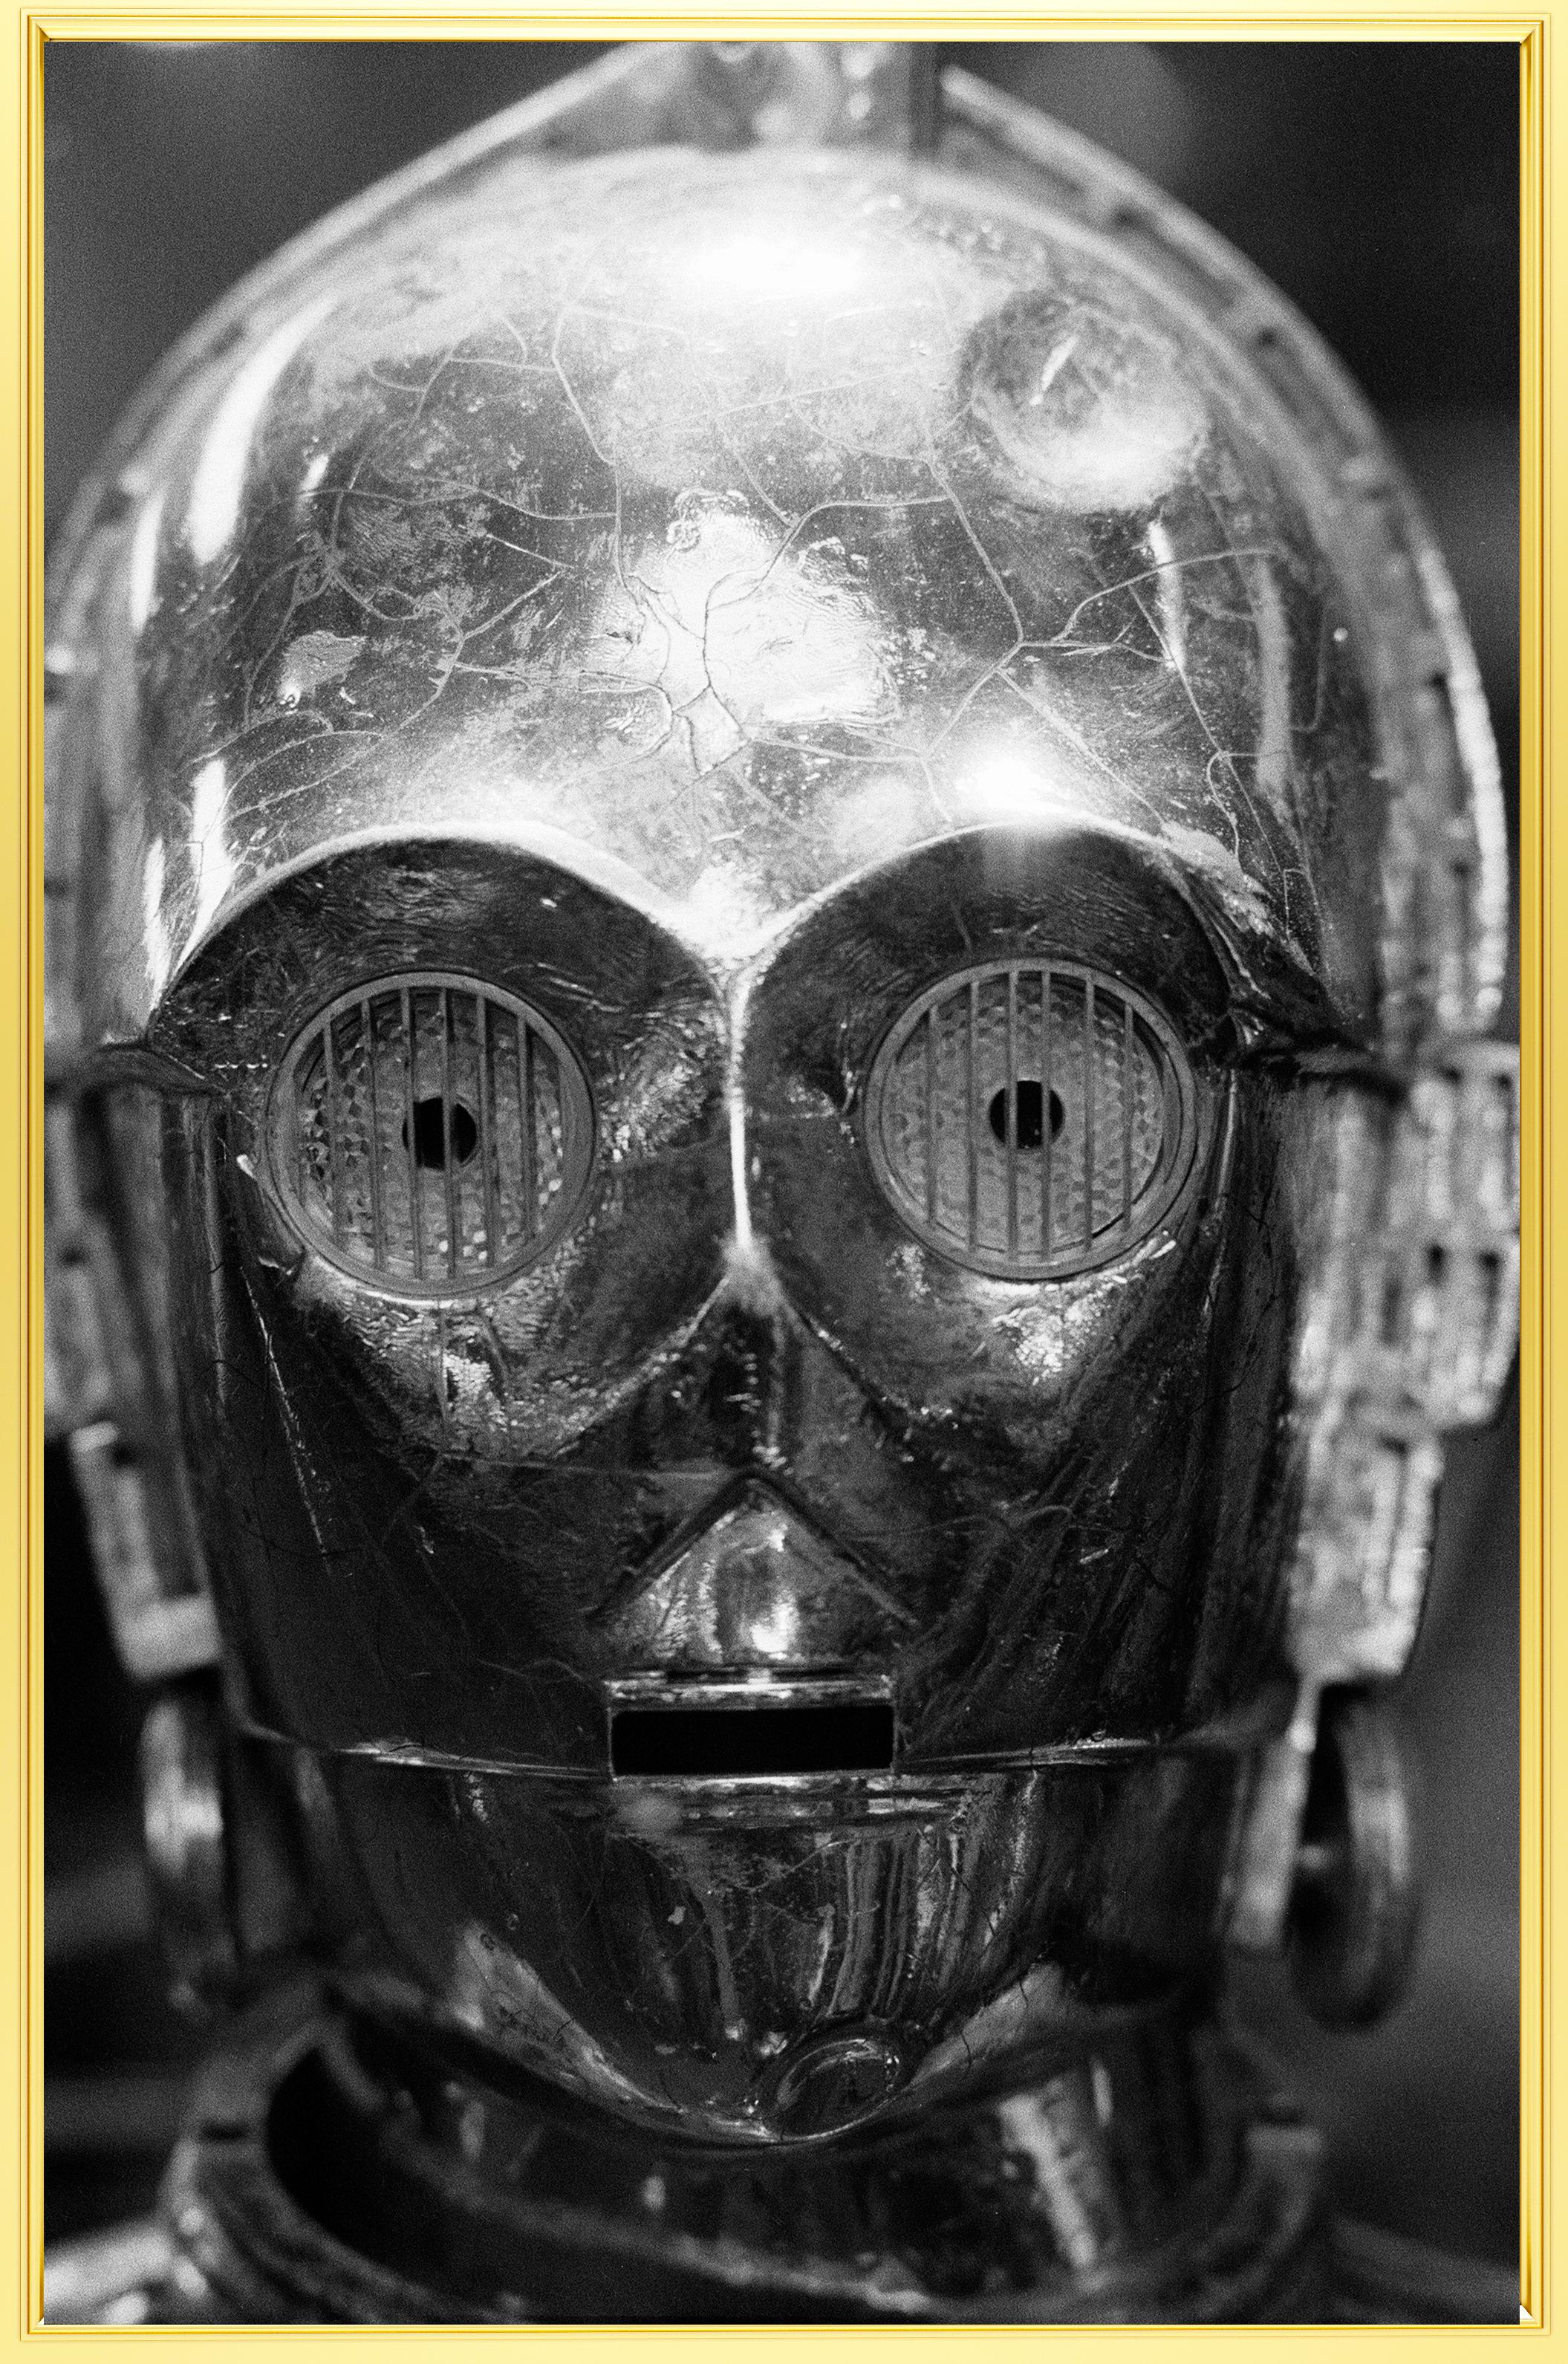 Geoff Wilkinson  Figurative Photograph - Supergiant - C3PO Star Wars Archival Pigment Print - Framed in gold gilt 